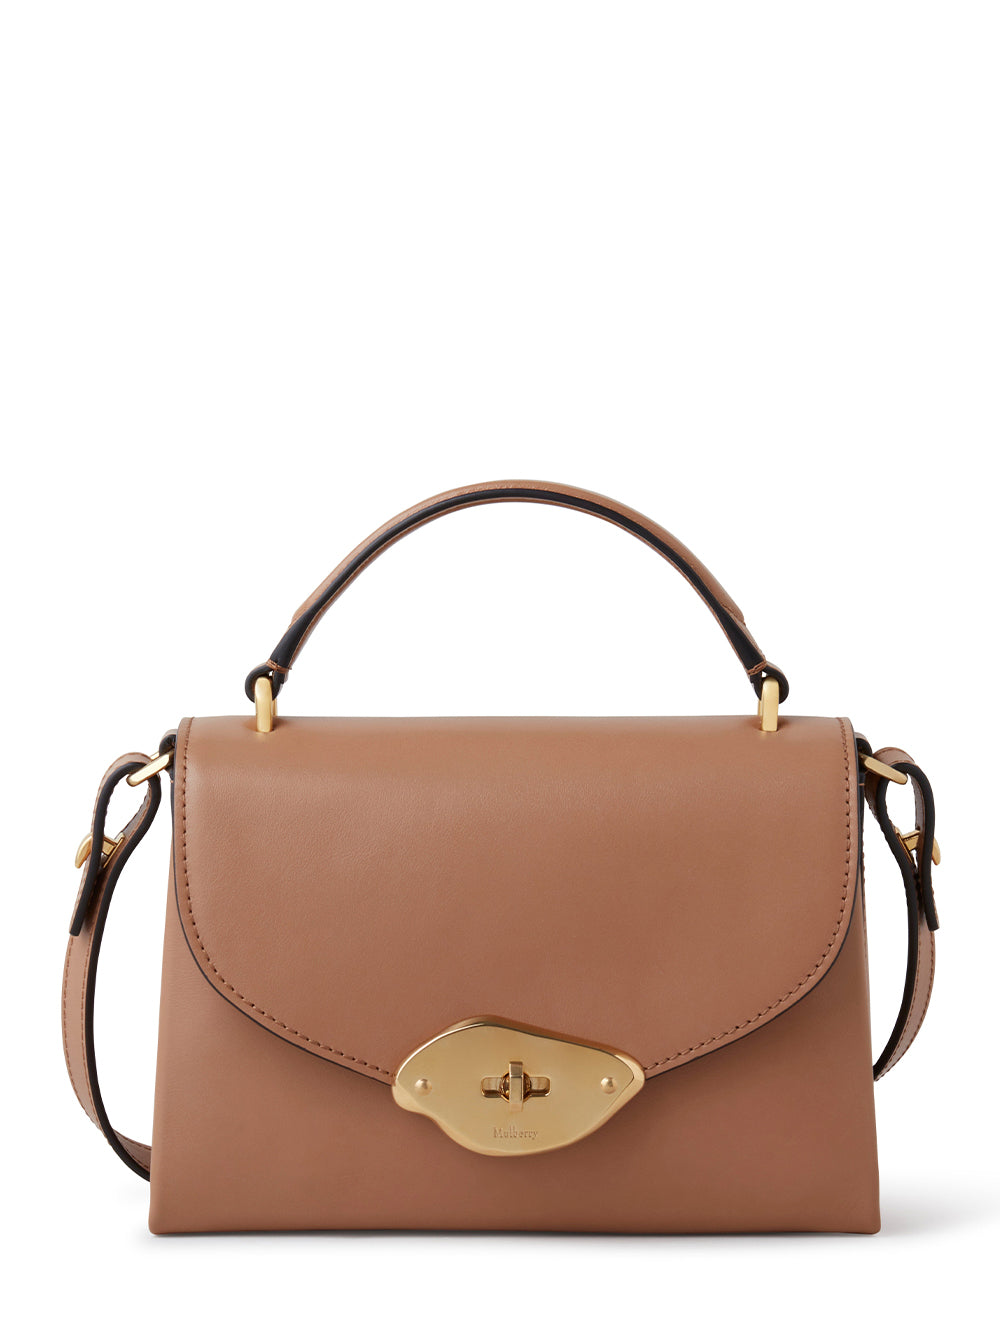 Mulberry-SmallLanaTopHandle-SableHighGlossLeather-1